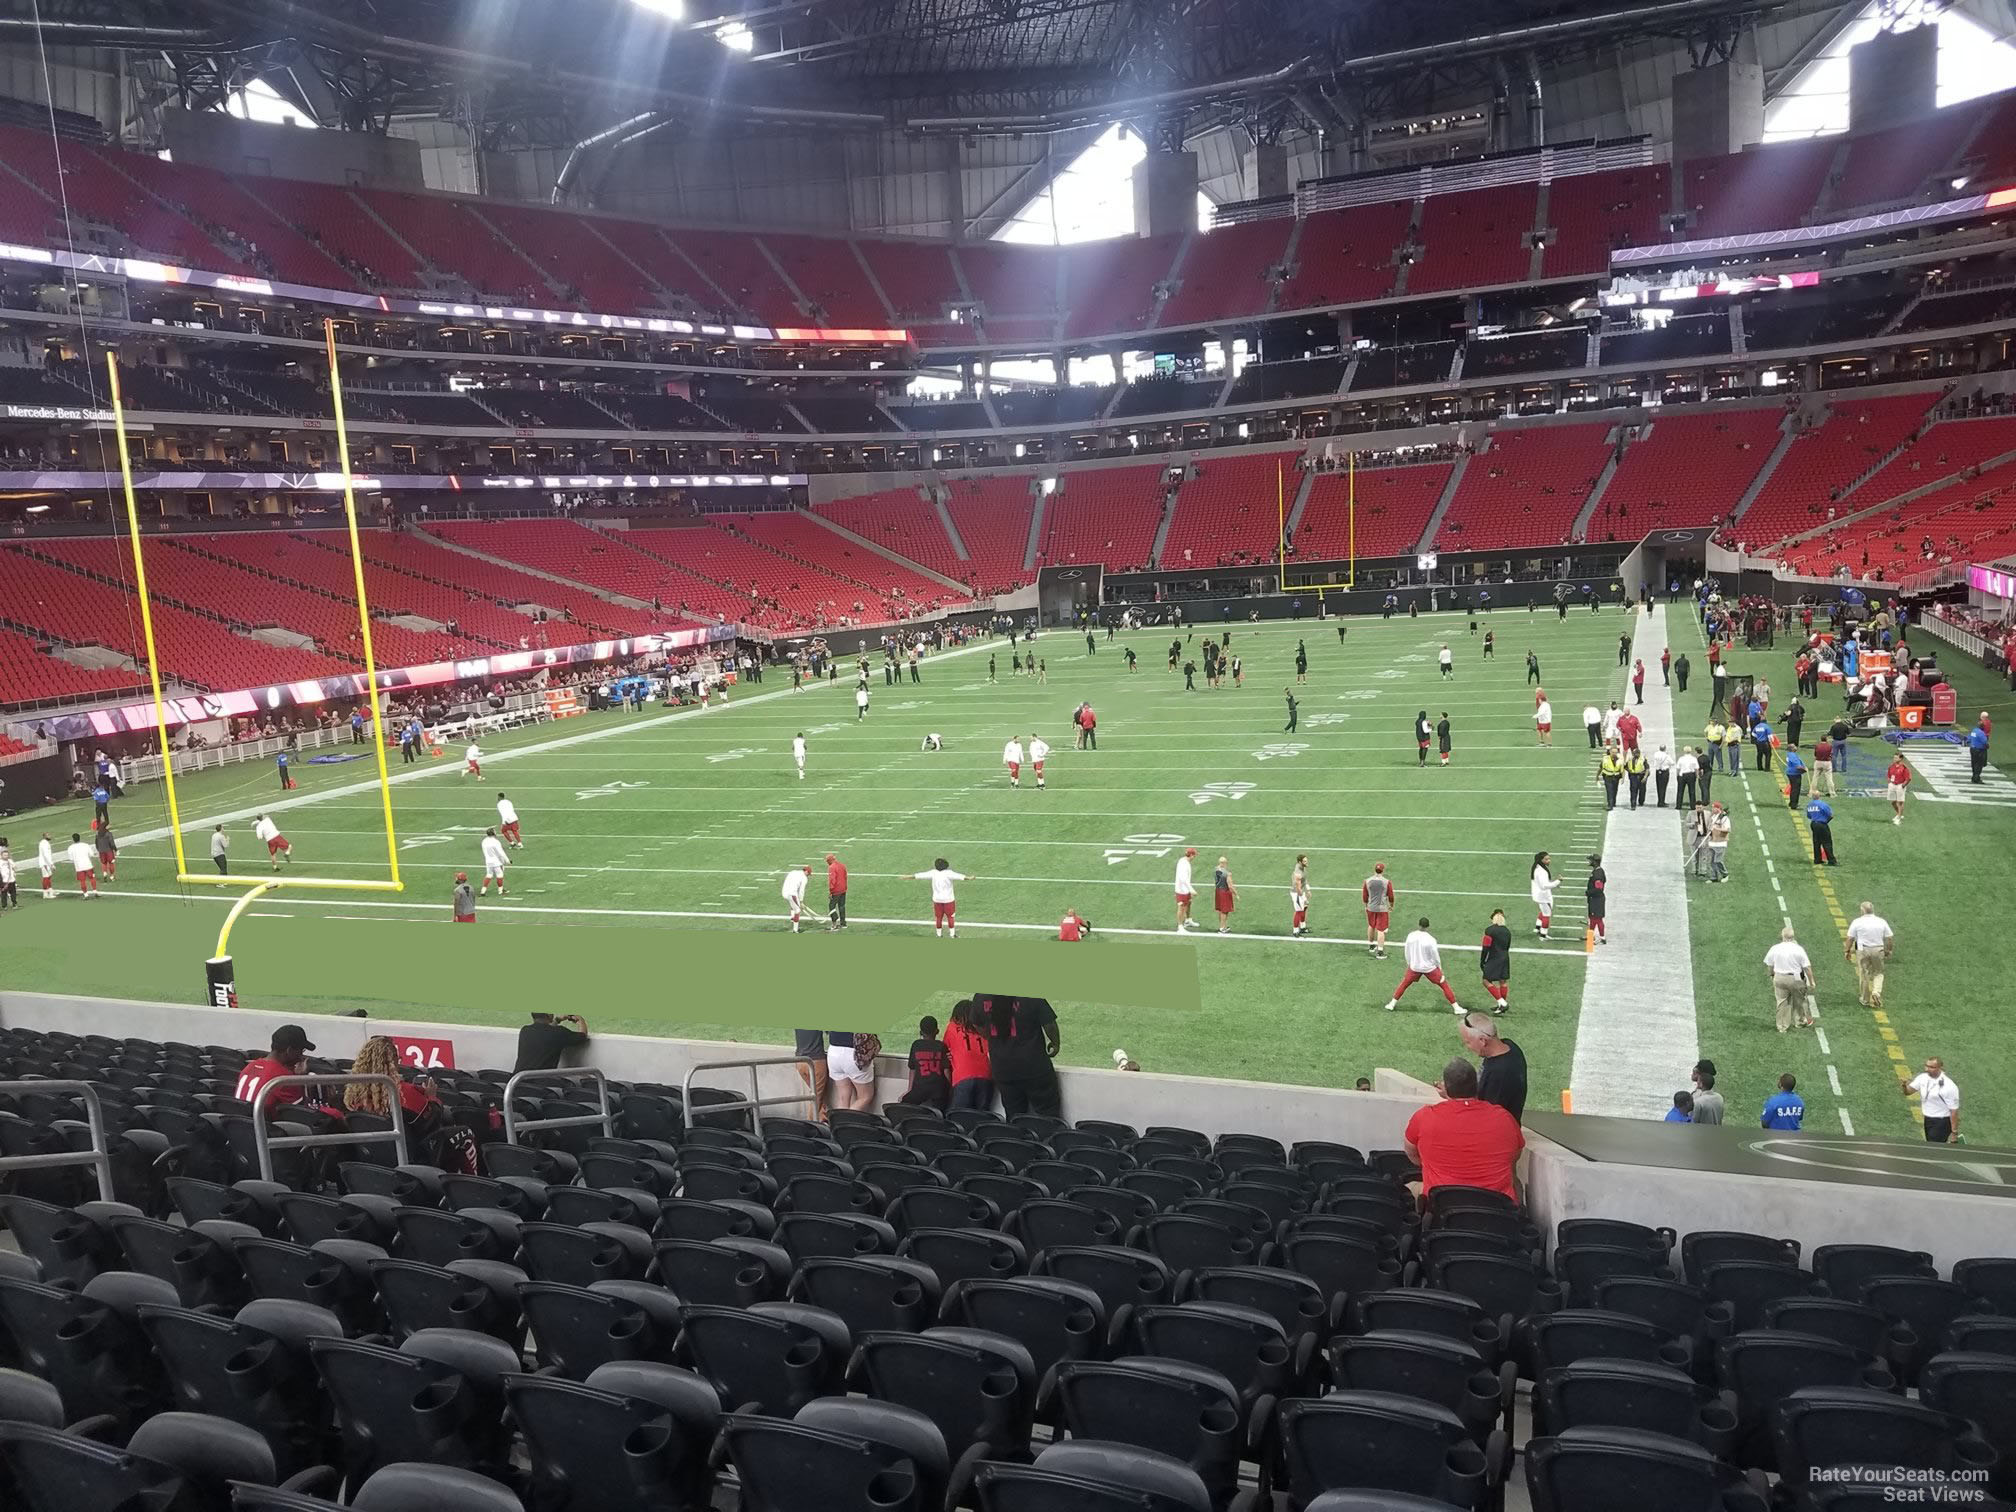 section 135, row 25 seat view  for football - mercedes-benz stadium